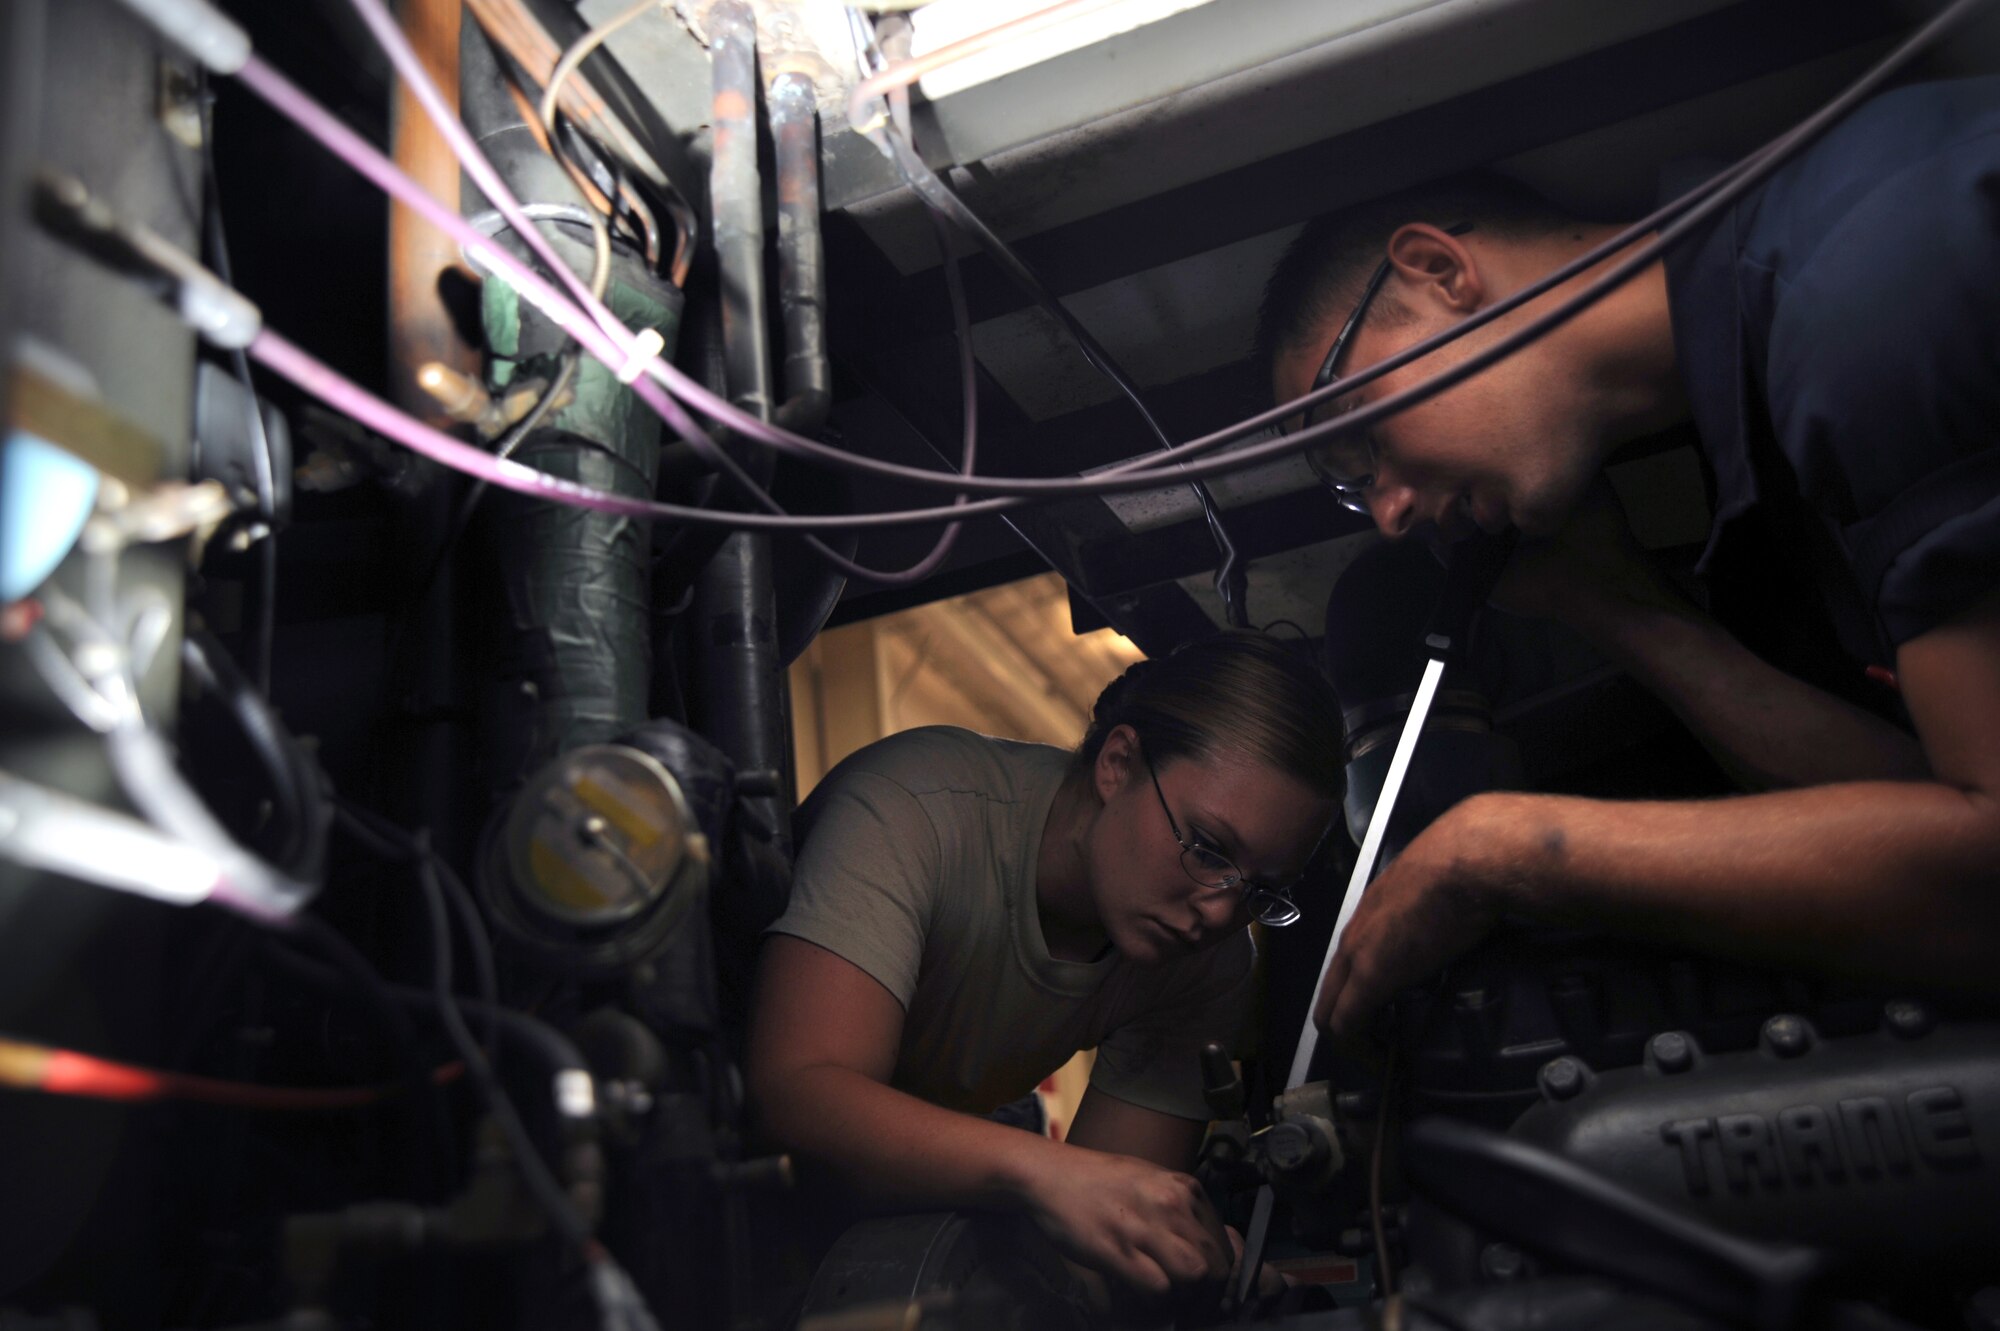 WHITEMAN AIR FORCE BASE, Mo., -- Senior Airman Elizabeth Shook and Airman 1st Class John McLaughlin, 509th Maintenance Squadron Aerospace Ground Equipment technician, change the clutch on a 401 ACE air conditioner on August 18. AGE mechanics ensure the equipment is operational to support the daily missions here.
(U.S. Air Force photo/Staff Sgt. Jason Huddleston) (Released)